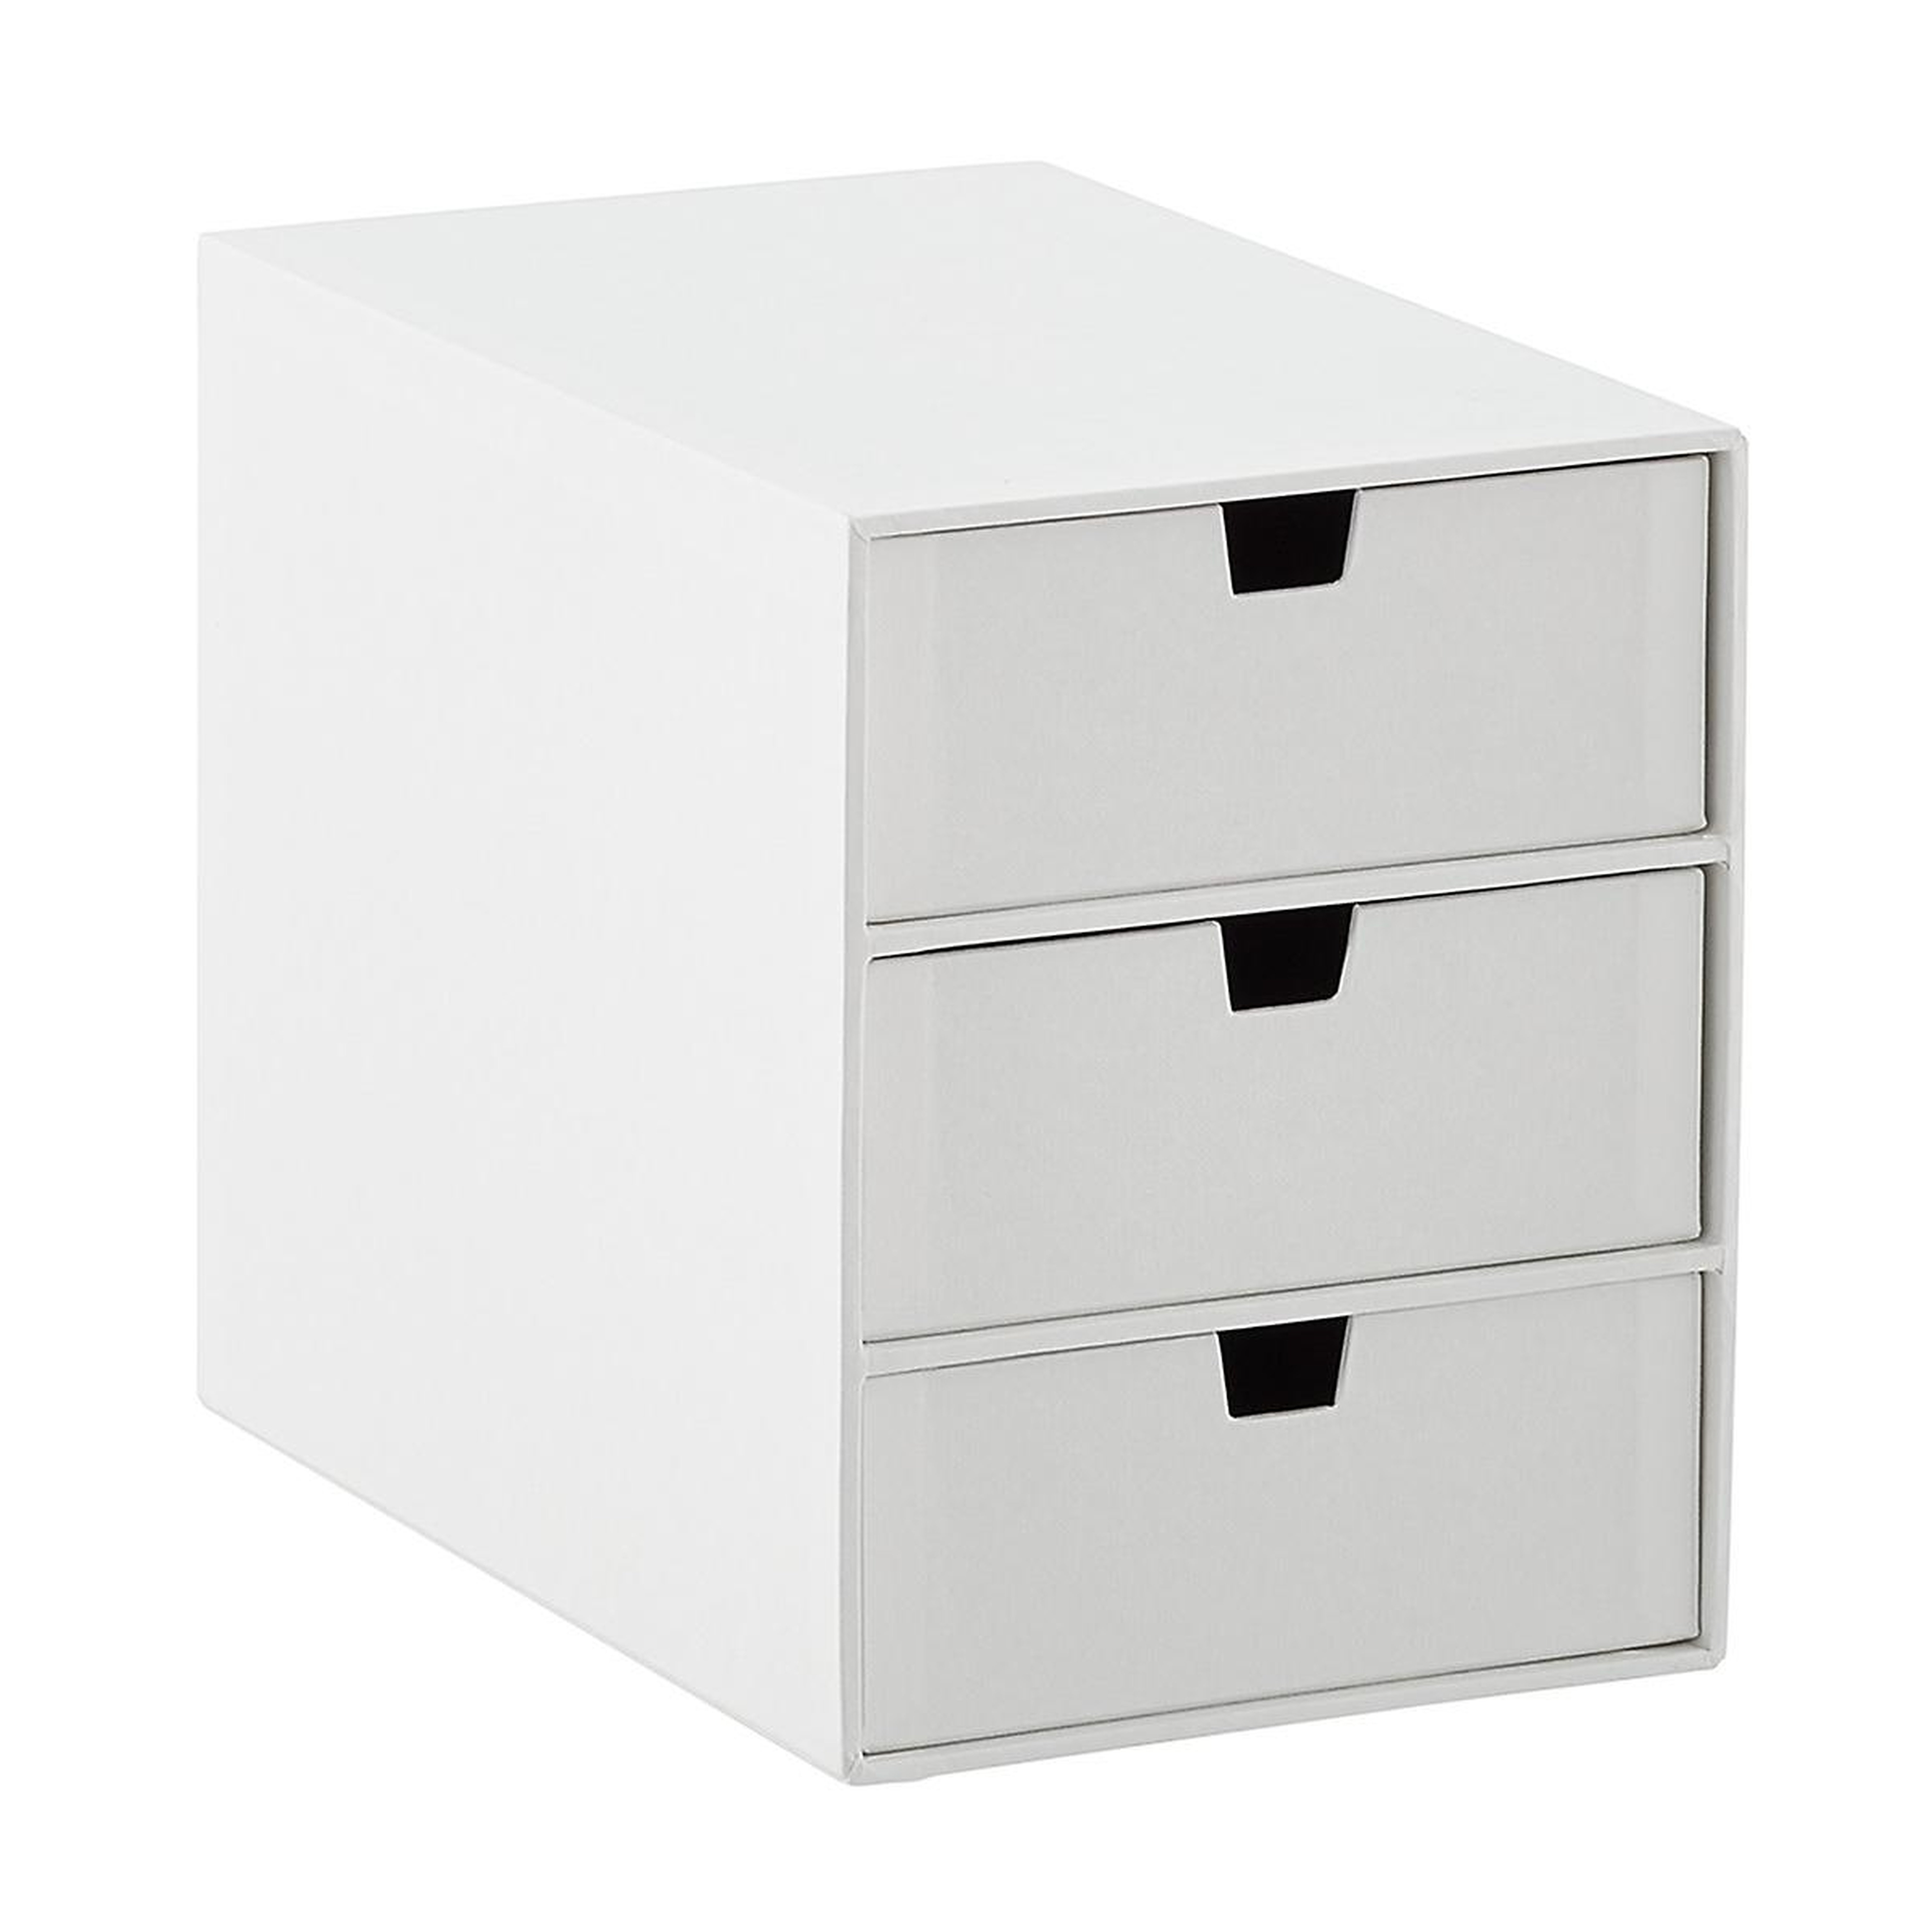 Bigso White Stockholm 3-Drawer Box - containerstore.com